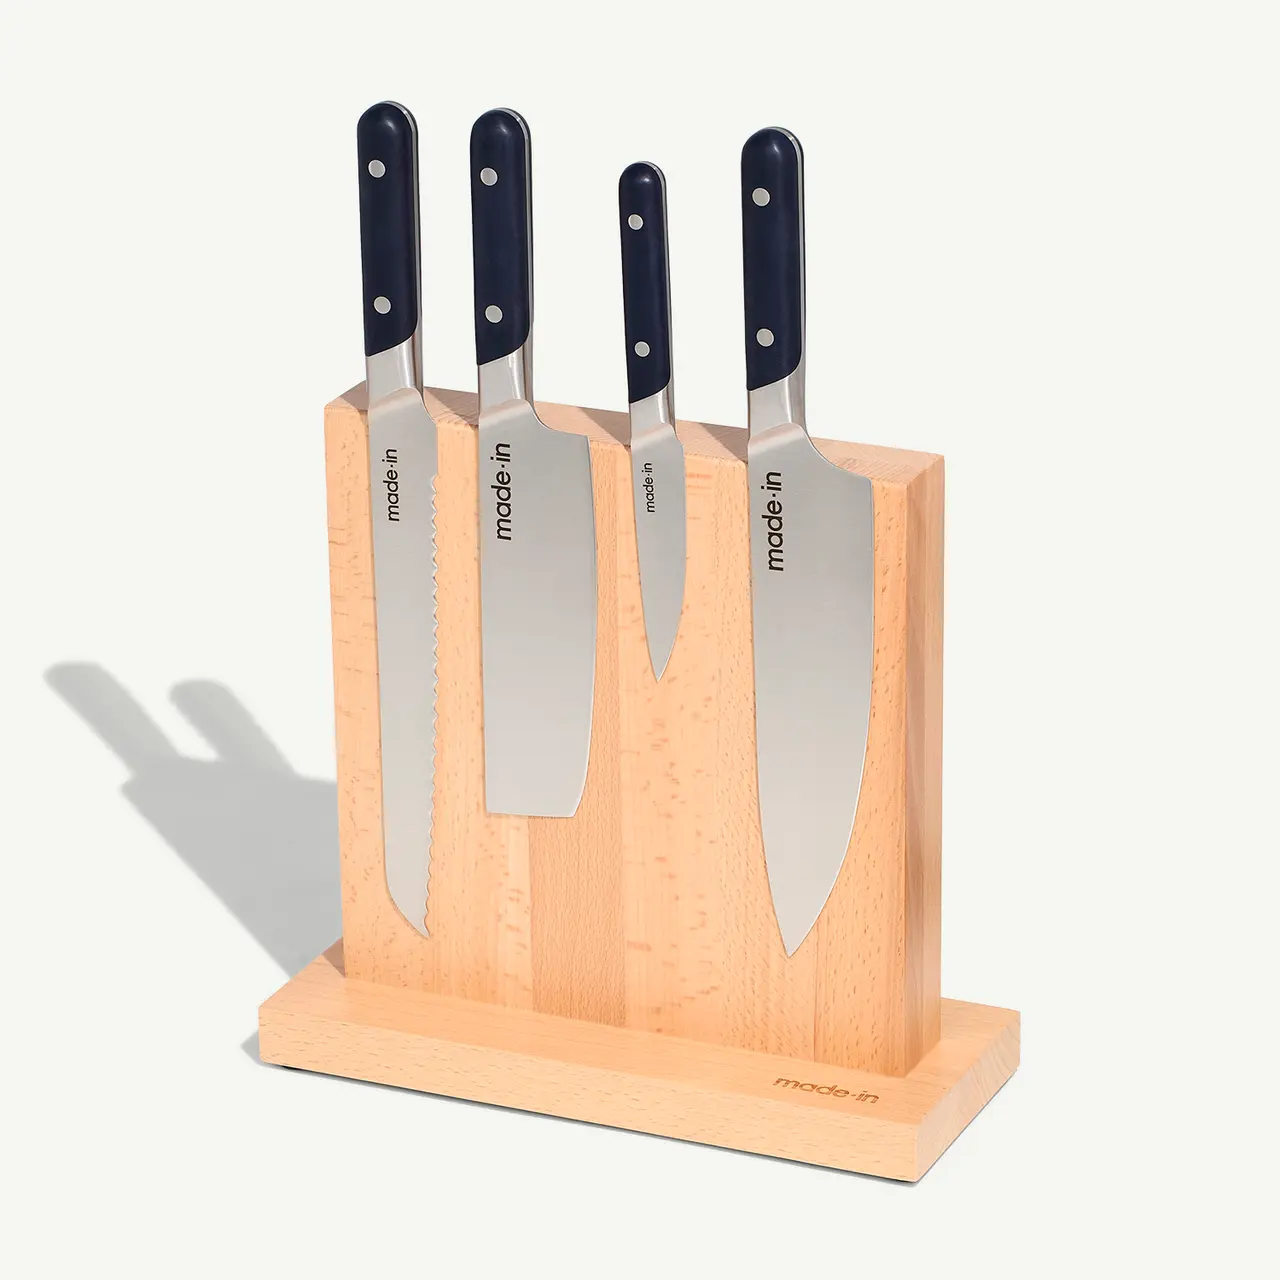 A set of four kitchen knives with dark handles is neatly arranged in a wooden block stand, casting a slight shadow on the right side.